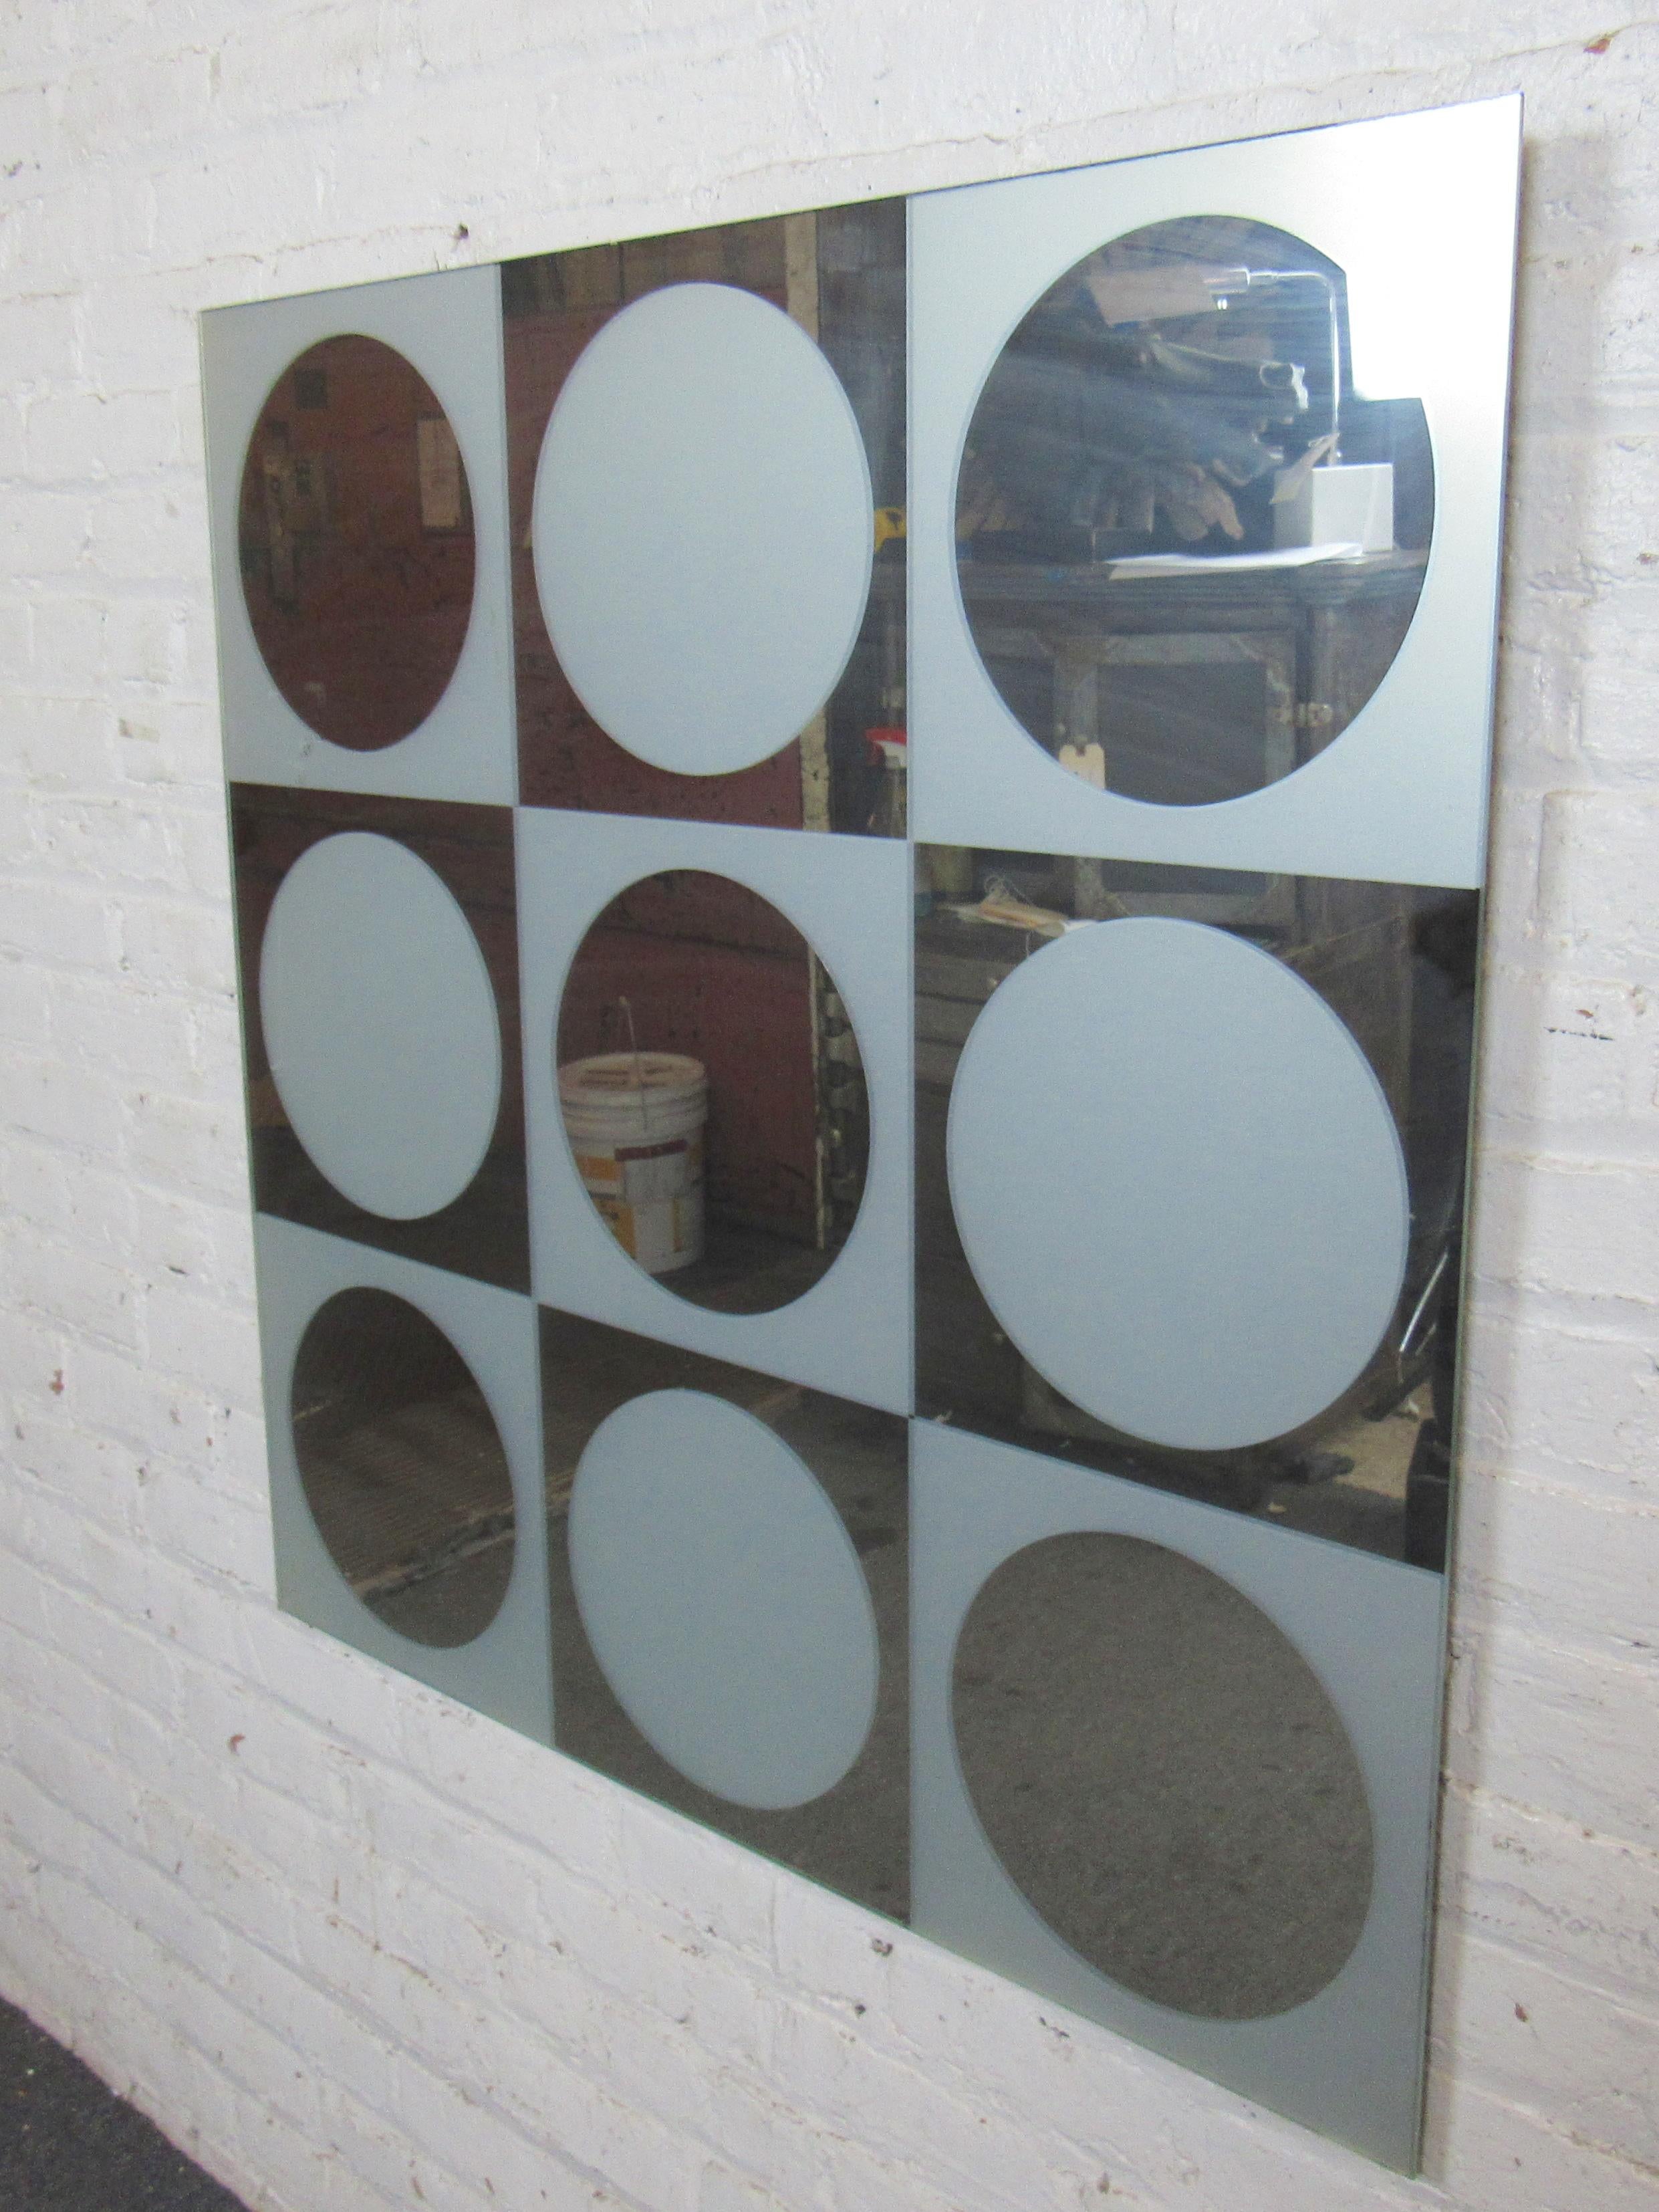 Mid-Century Modern Op Art mirror. Has clear and frosted circles.
(Please confirm location NY or NJ).